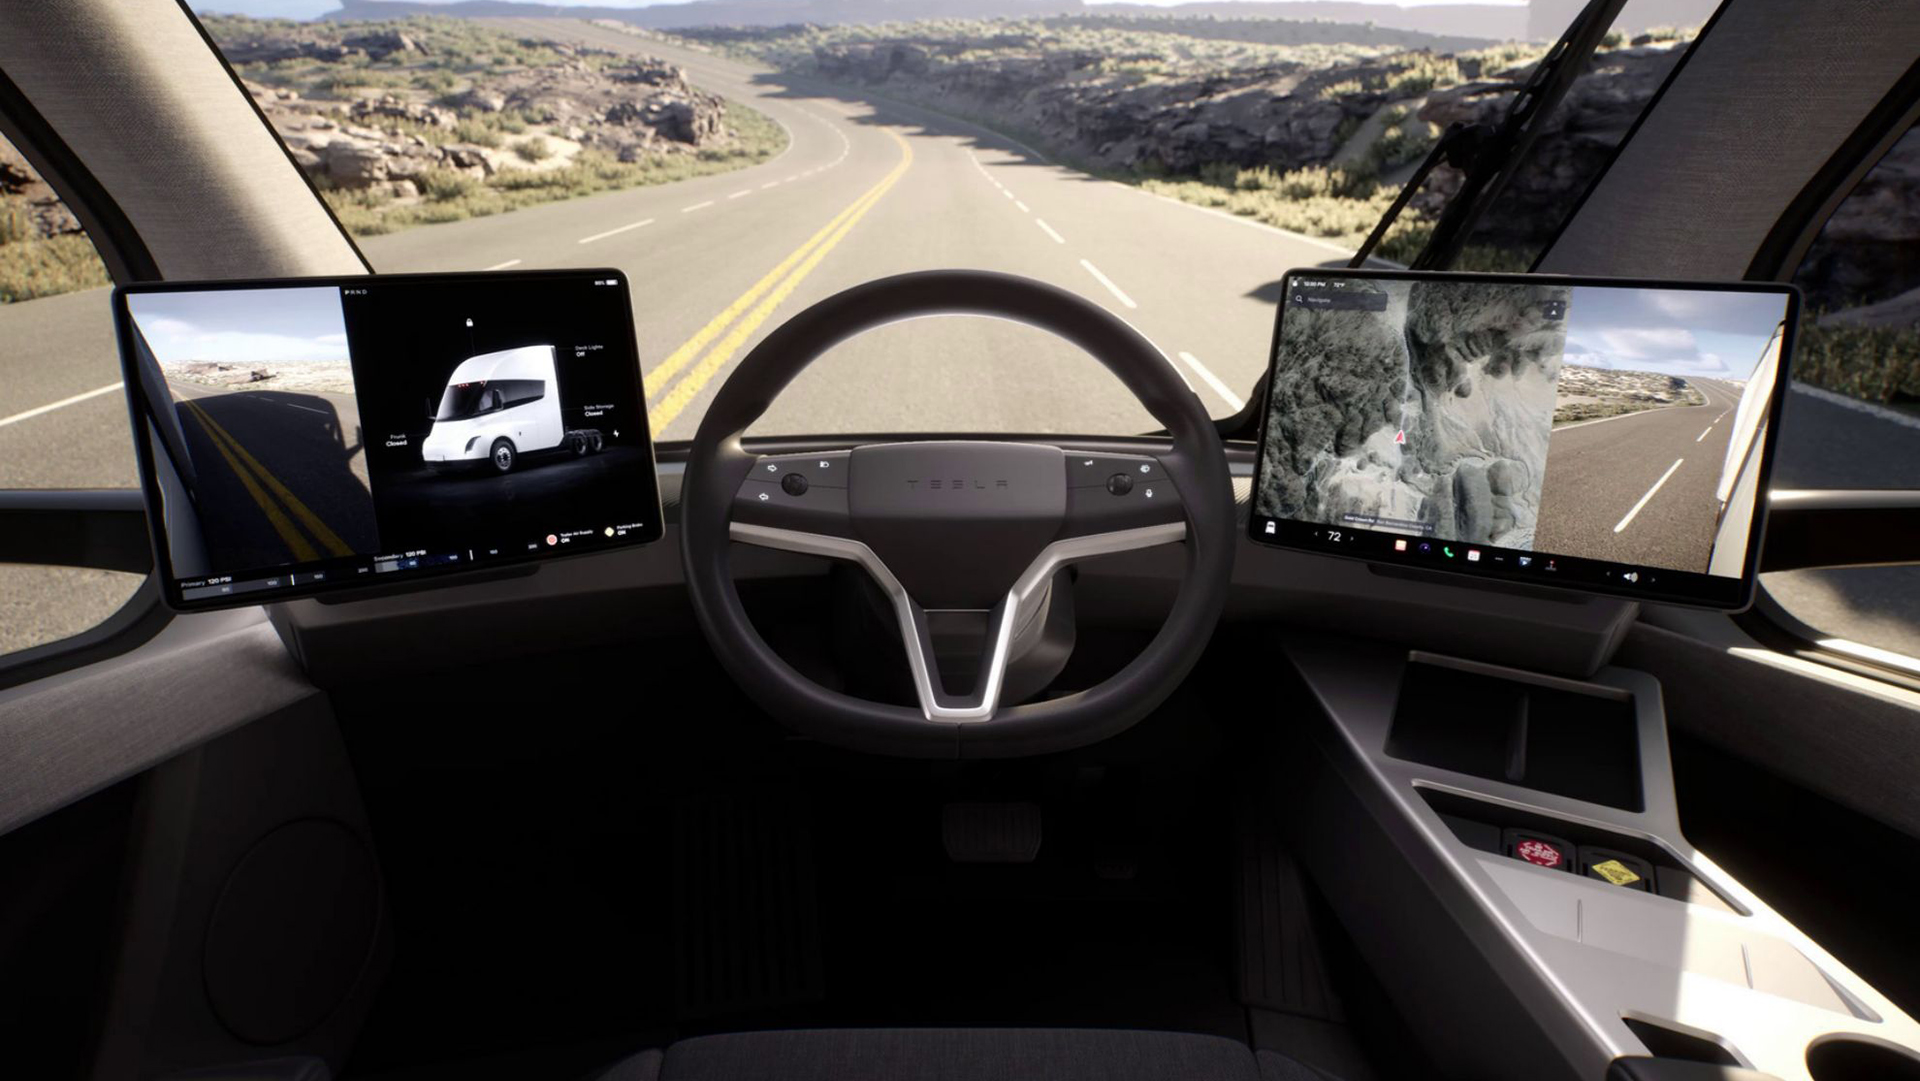 The interior of the Tesla cabin Semi has the steering wheel in the central position with the large windows on both sides